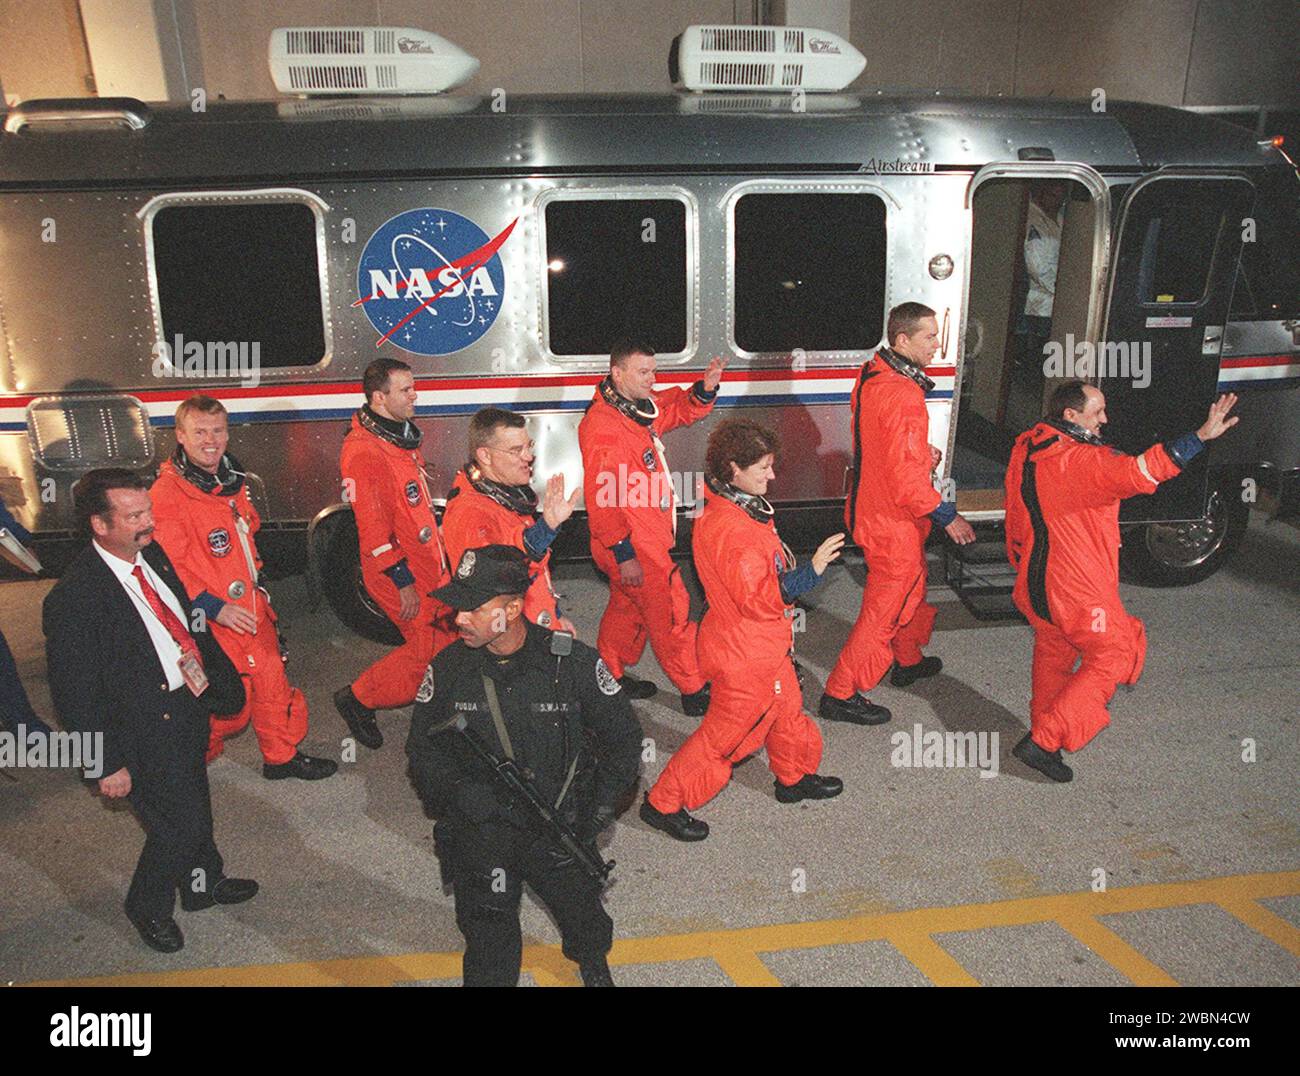 The STS-102 crew wave to onlookers as they head for the Astrovan after leaving the Operations and Checkout Building. Left to right are Mission Specialists Andrew Thomas, Paul Richards and James Voss; Pilot James Kelly; Mission Specialist Susan Helms; Commander James Wetherbee; and Mission Specialist Yury Usachev. STS-102 is the eighth construction flight to the Space Station, carrying the Multi-Purpose Logistics Module Leonardo. The primary delivery system used to resupply and return Station cargo requiring a pressurized environment, Leonardo will deliver up to 10 tons of laboratory racks fill Stock Photo